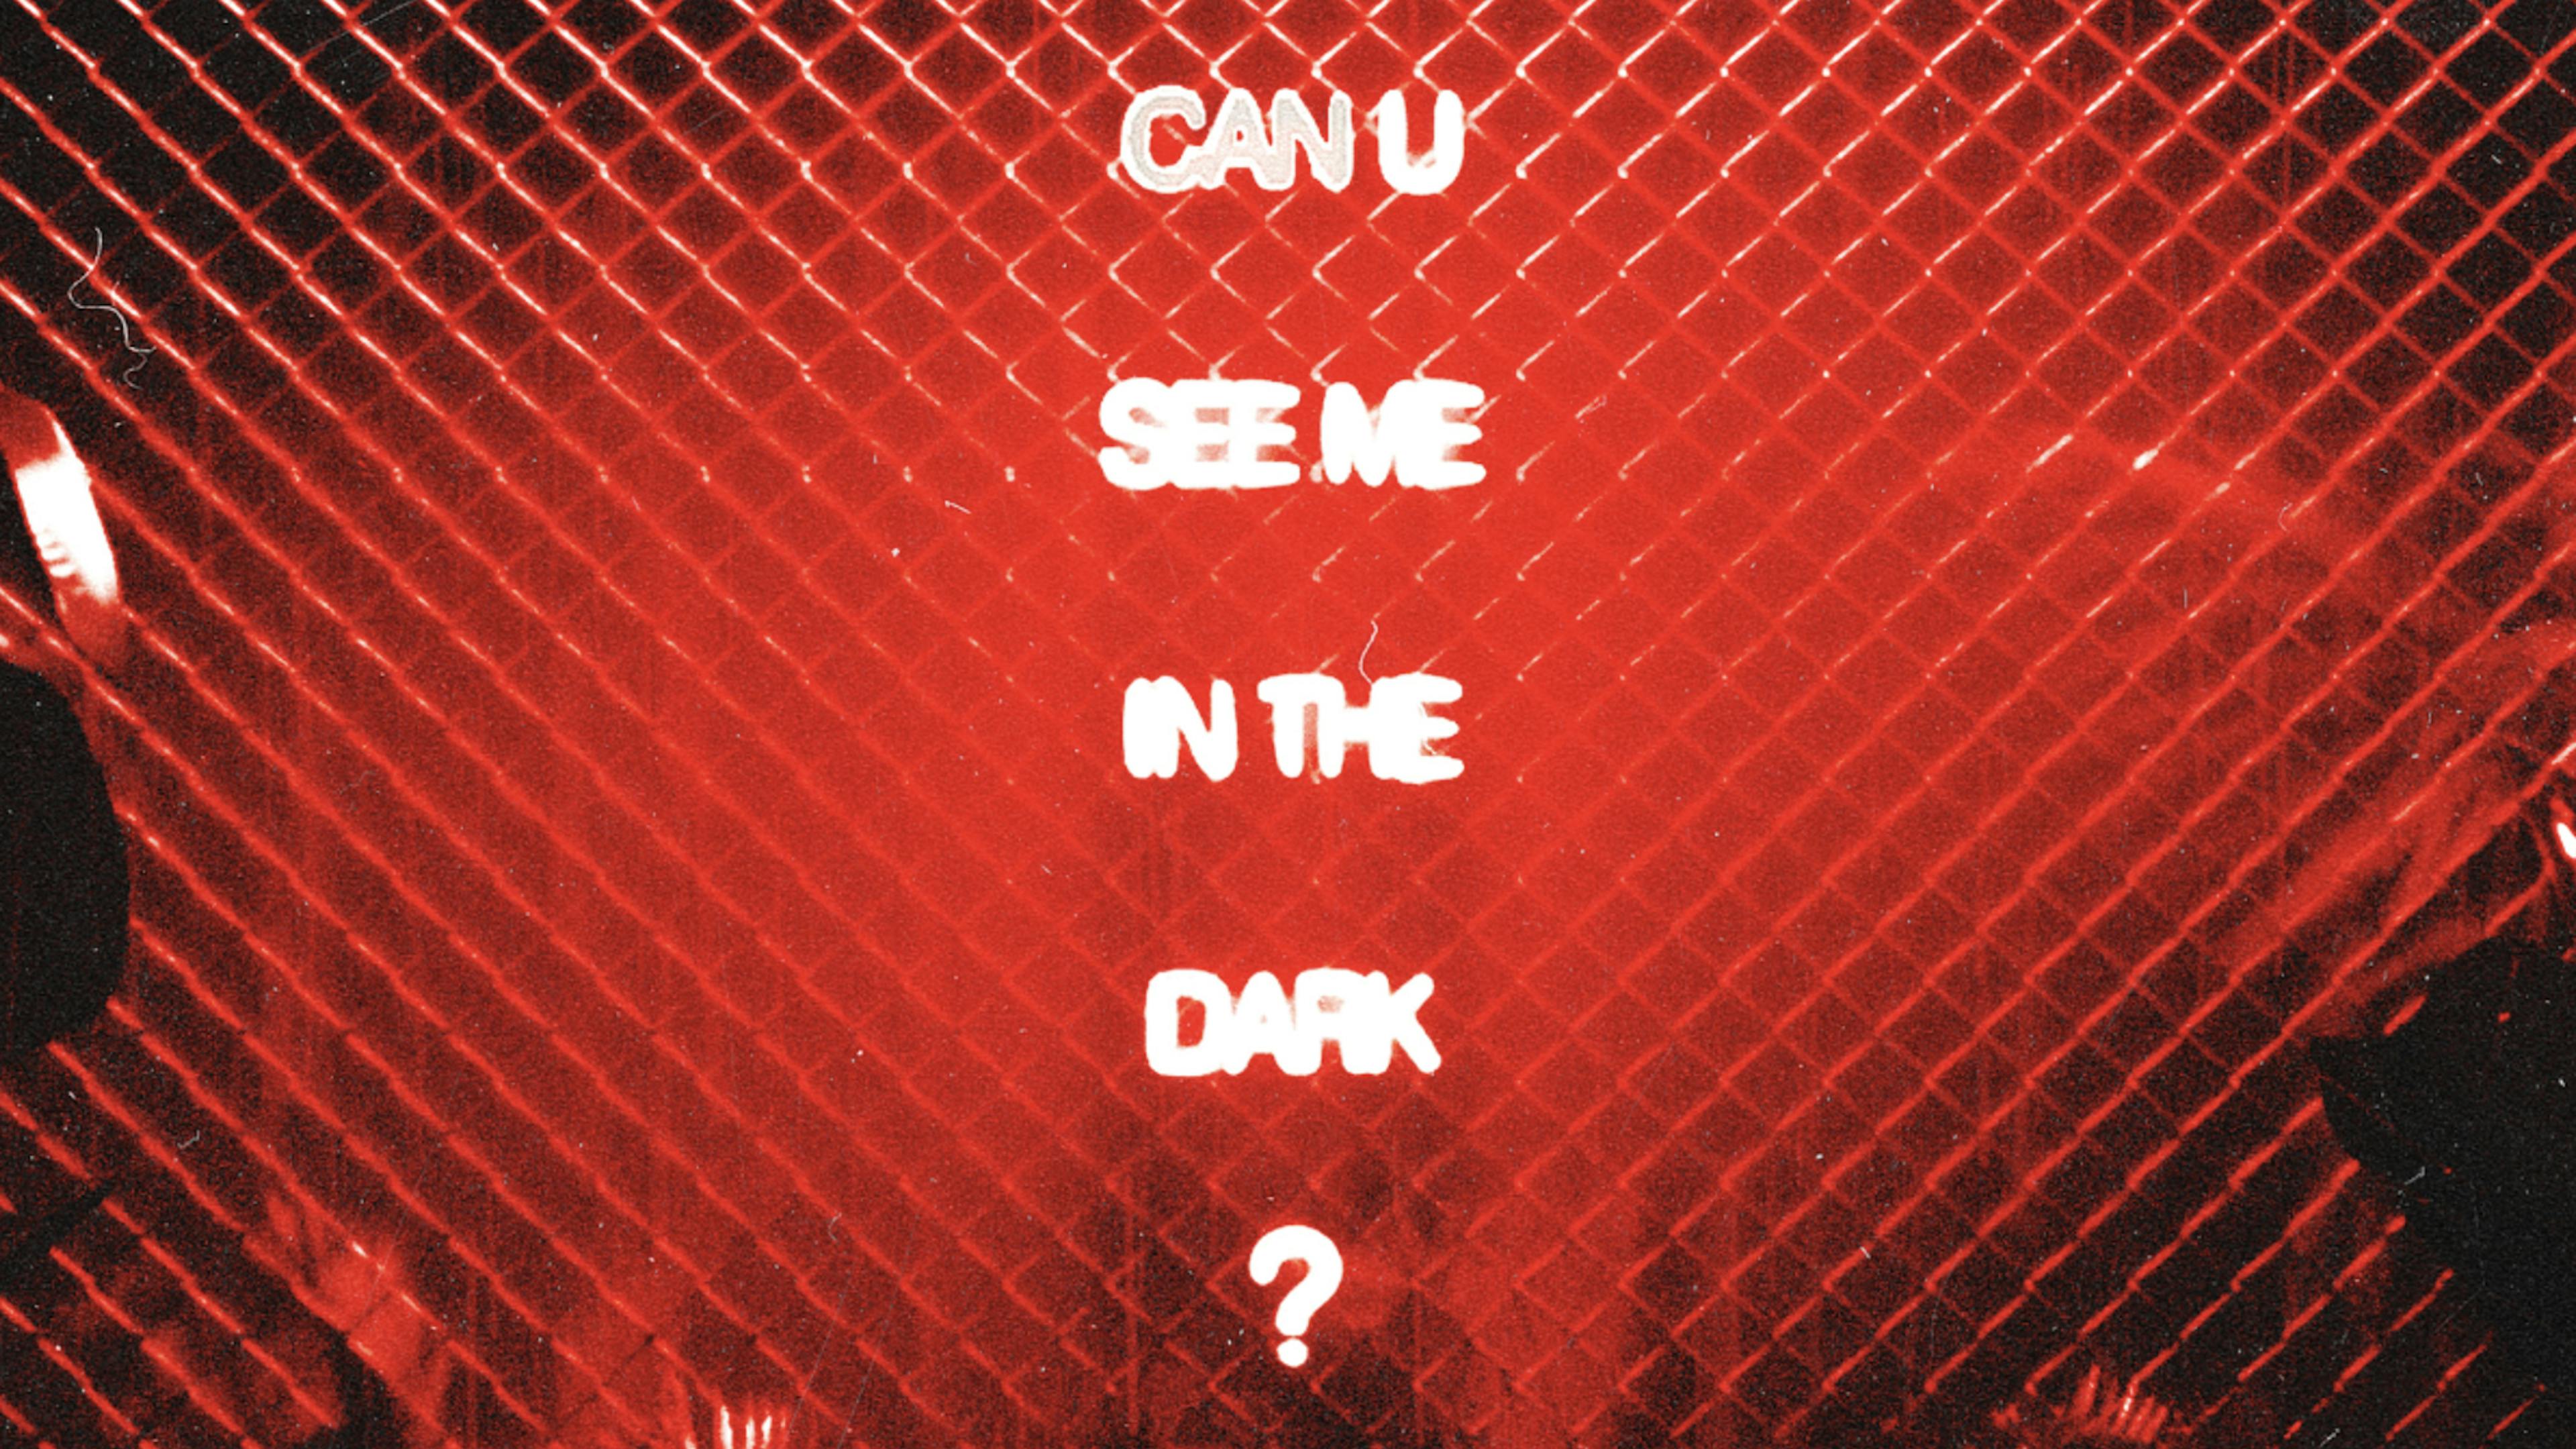 Halestorm and I Prevail team up for new single, can u see me in the dark?